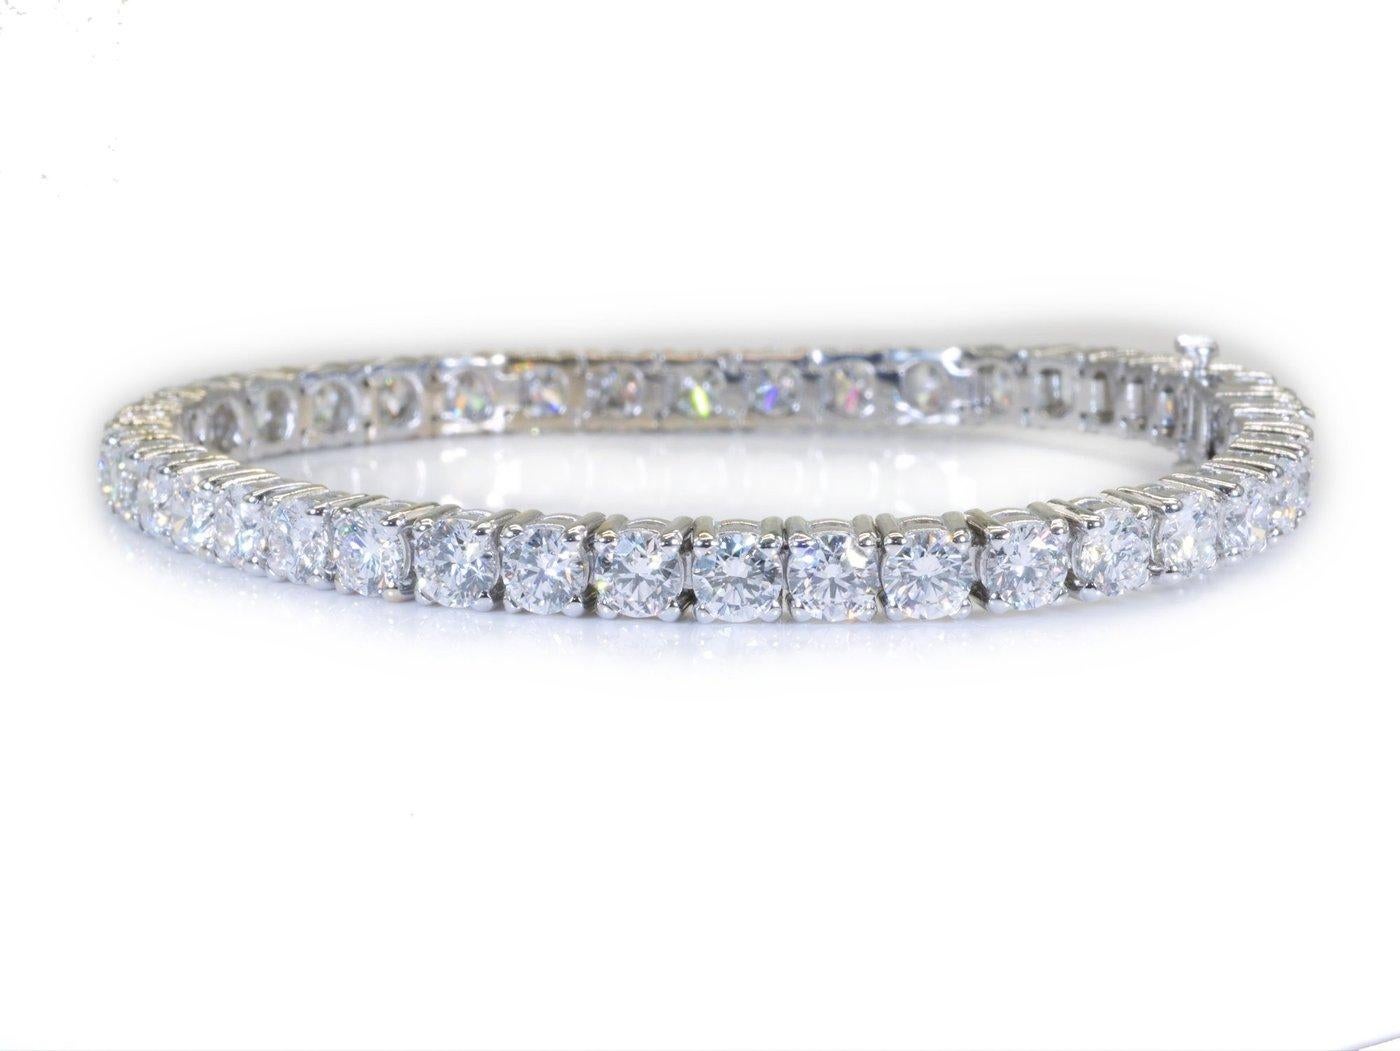 Luxurious 18k White Gold Bracelet w/ 12.51 Ct Natural Diamonds, GIA Certificate In New Condition For Sale In רמת גן, IL